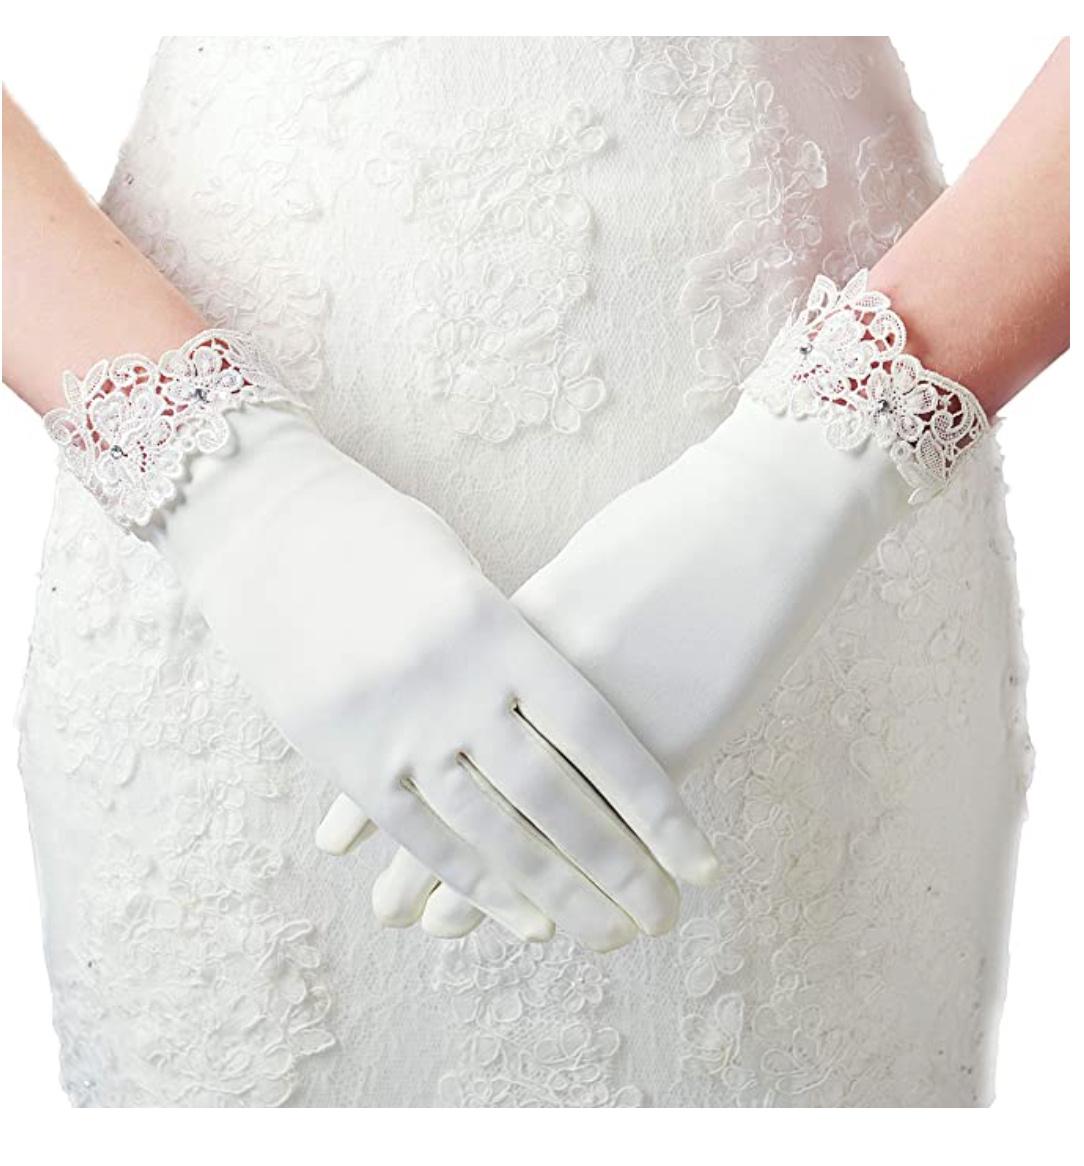 Stylish Black Lace Gloves Evening Gloves Bridal Accessories An old-fashioned accessory makes an elegant comeback